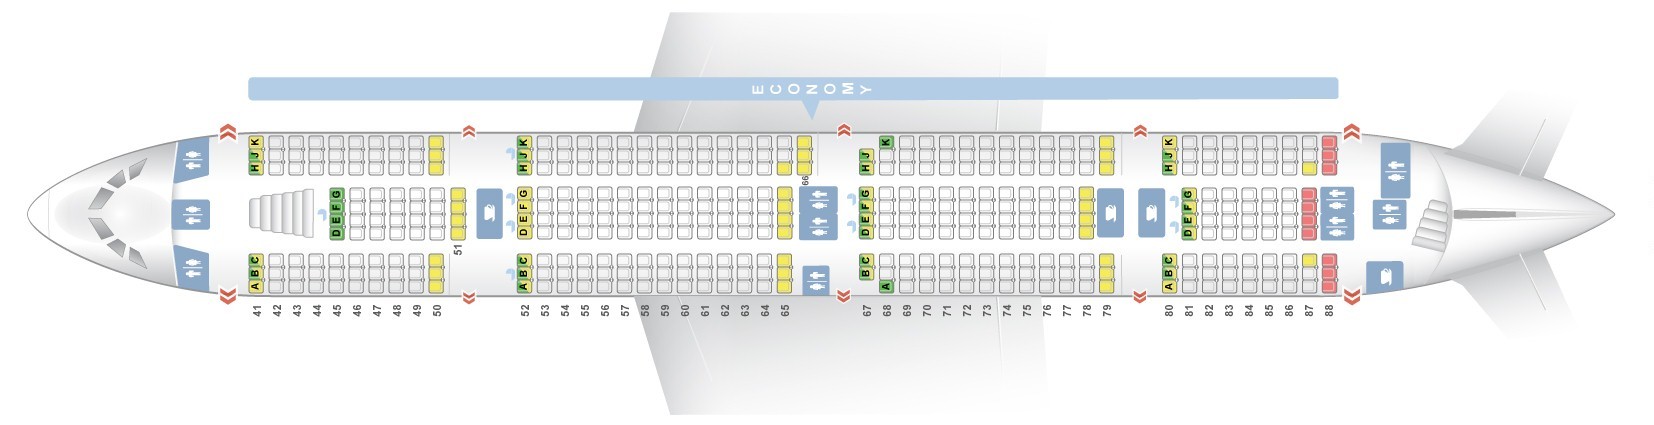 A380 Seating Chart